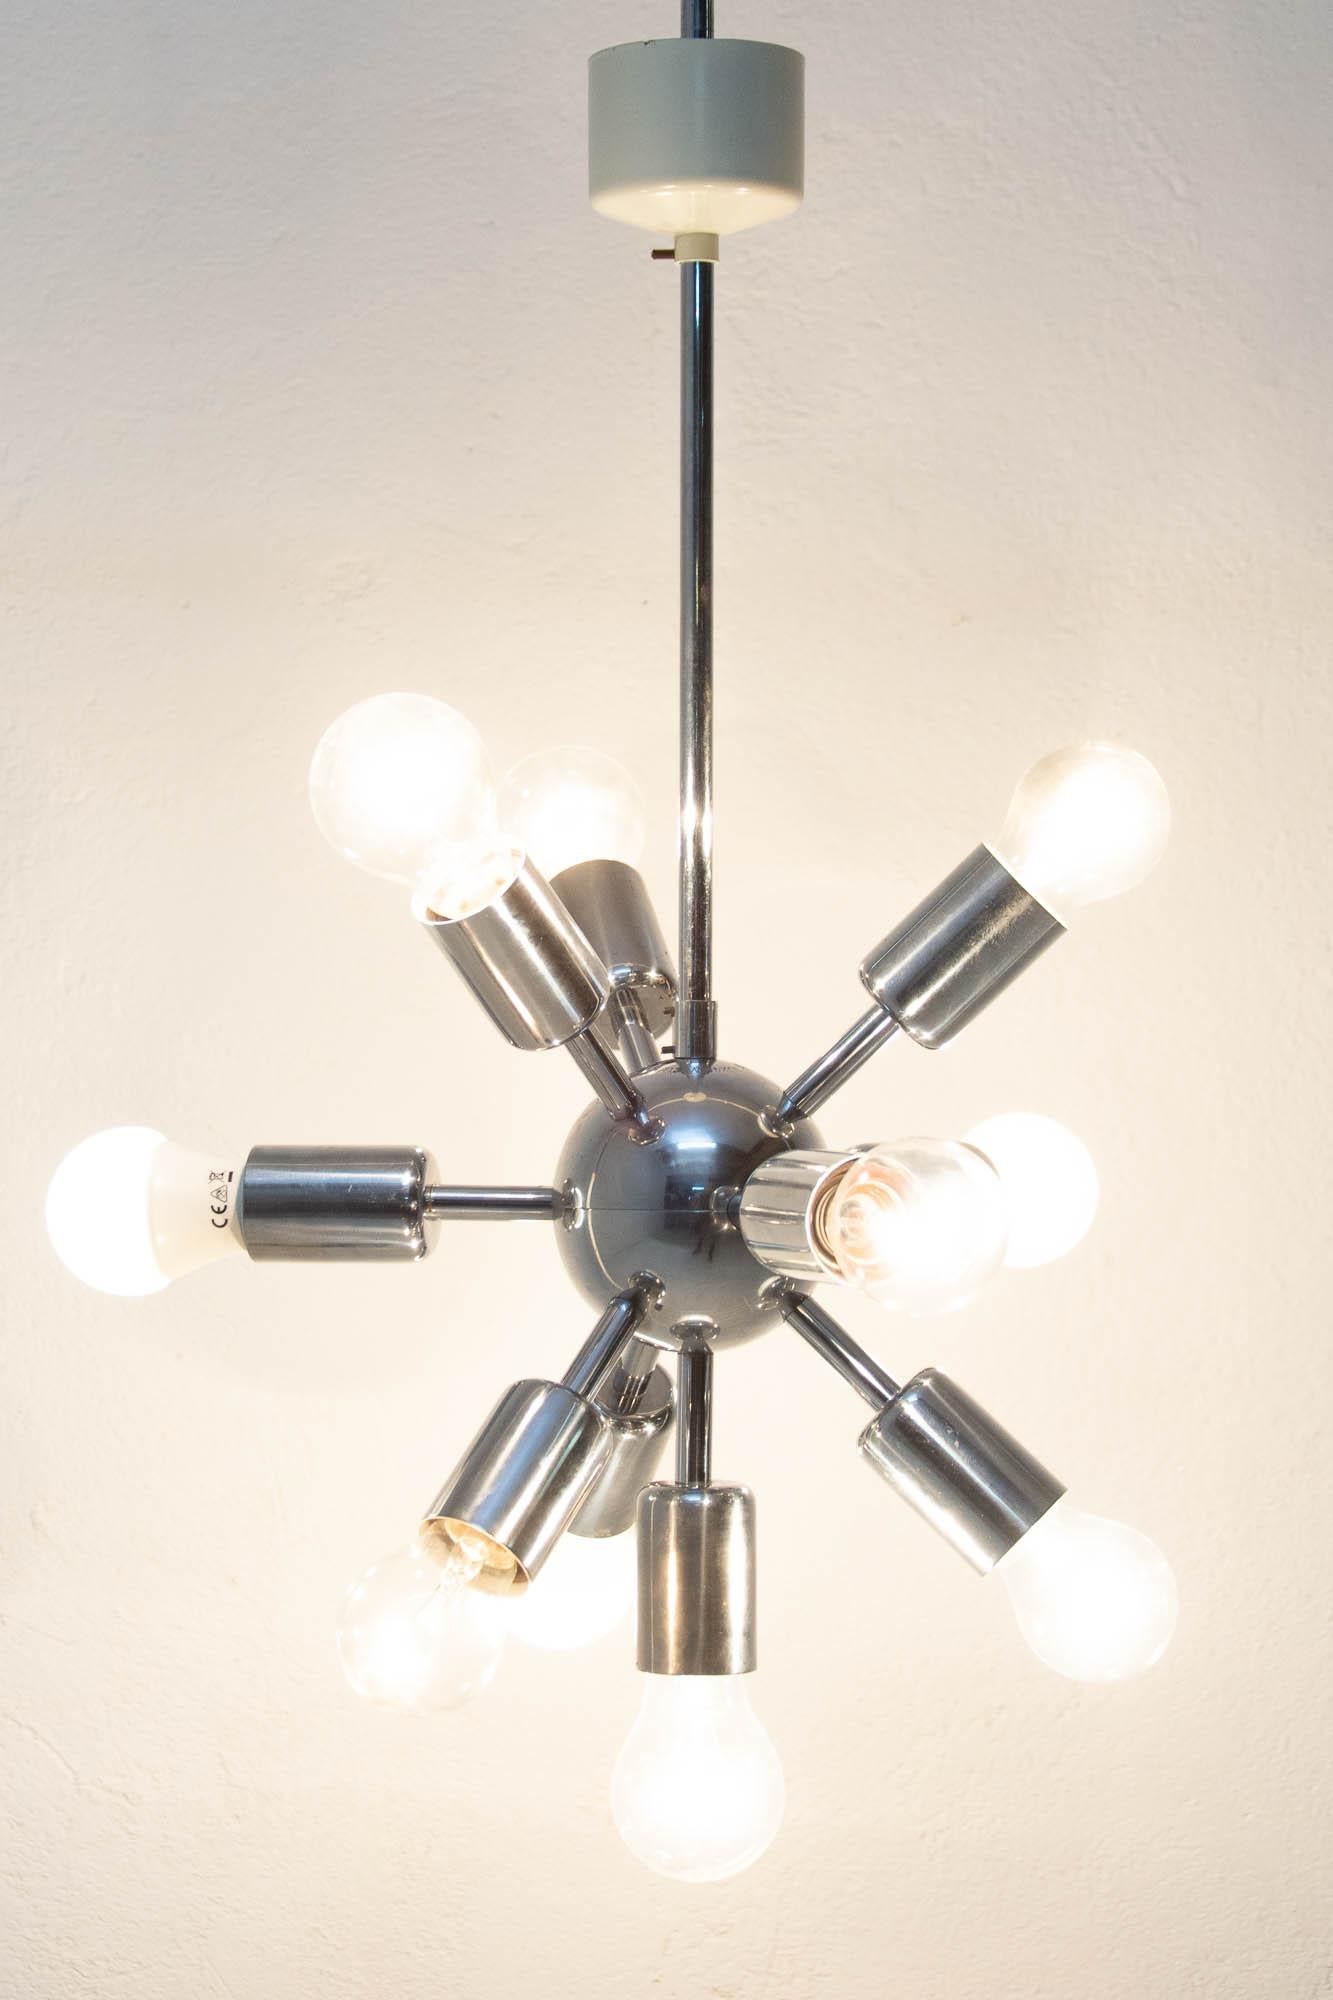 This Space Age Sputnik chandelier was made in the former Czechoslovakia by Drupol company in the 1960s. It features 10 chromed arms with E27 bulb socket. The chandelier is in very good vintage condition just bears a minor signs of age and using. It